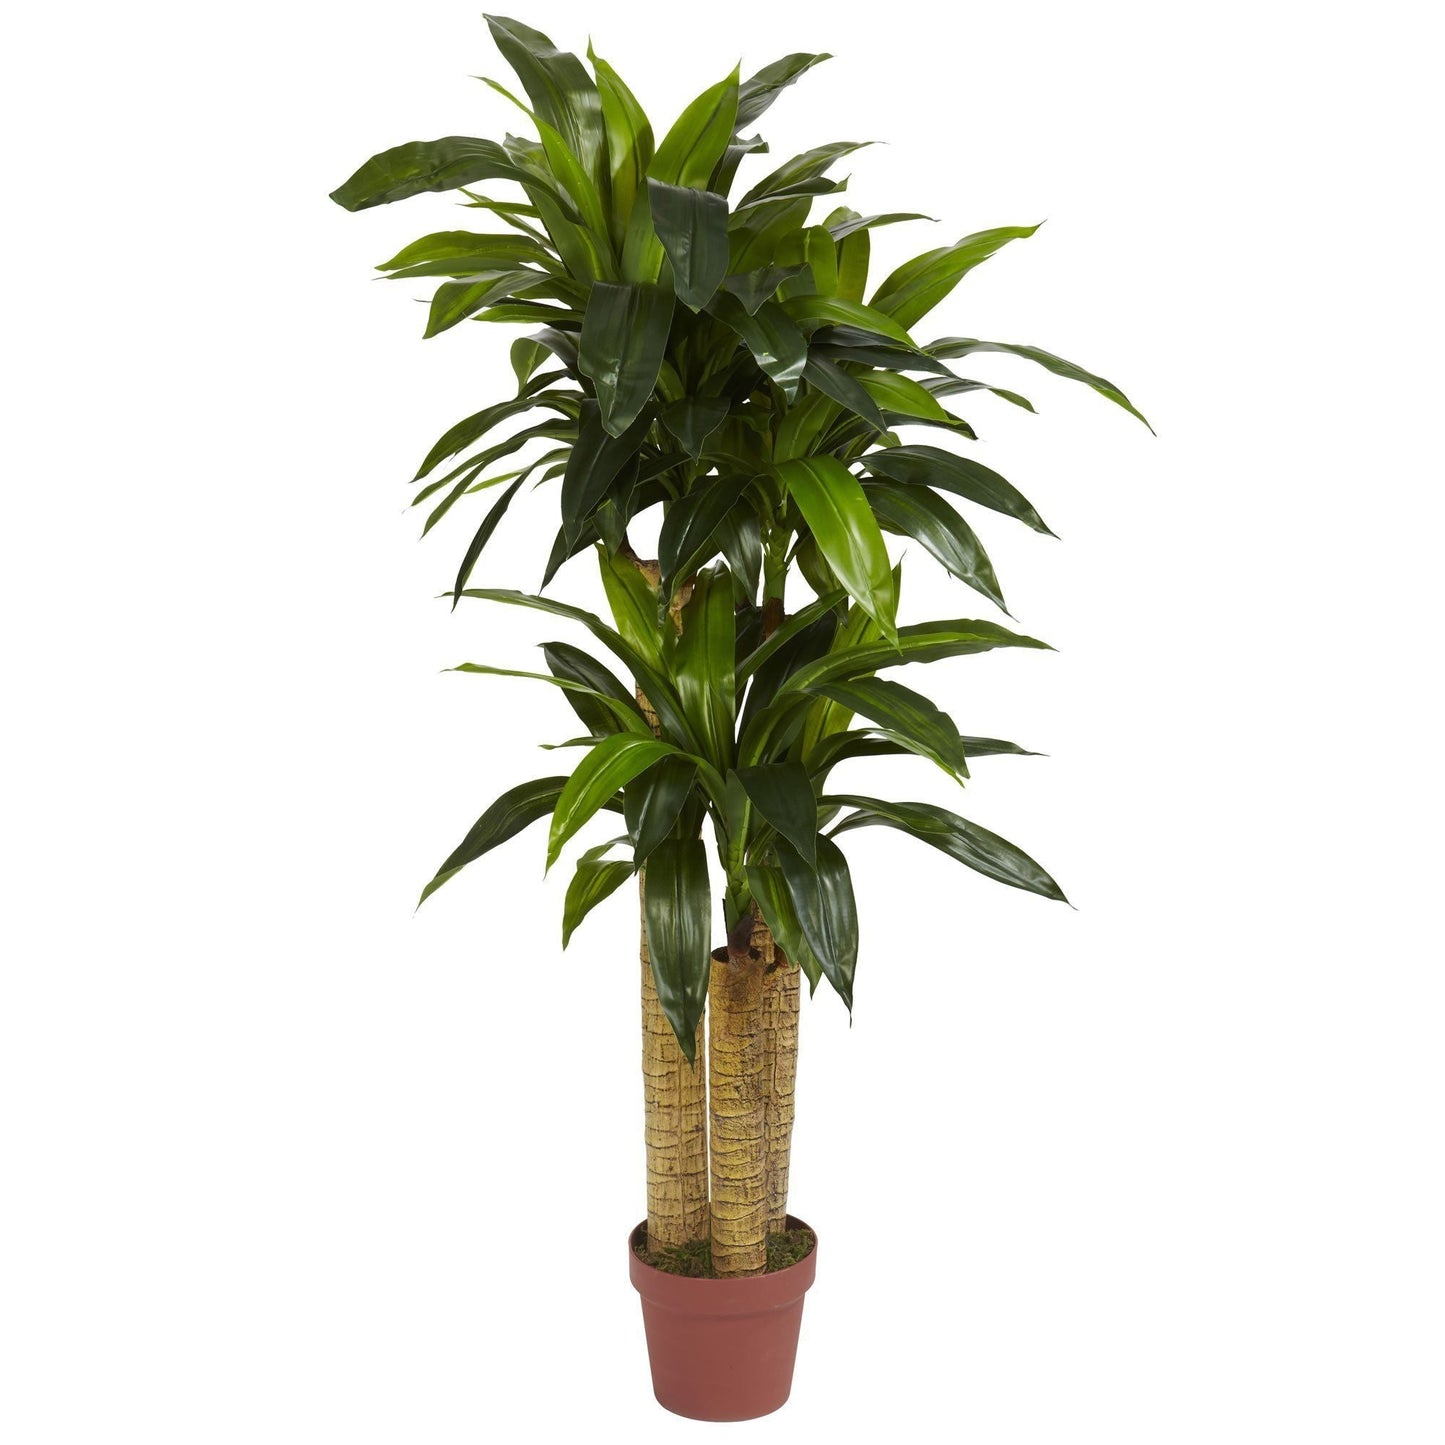 4' Corn Stalk Dracaena Silk Plant (Real Touch) by Nearly Natural